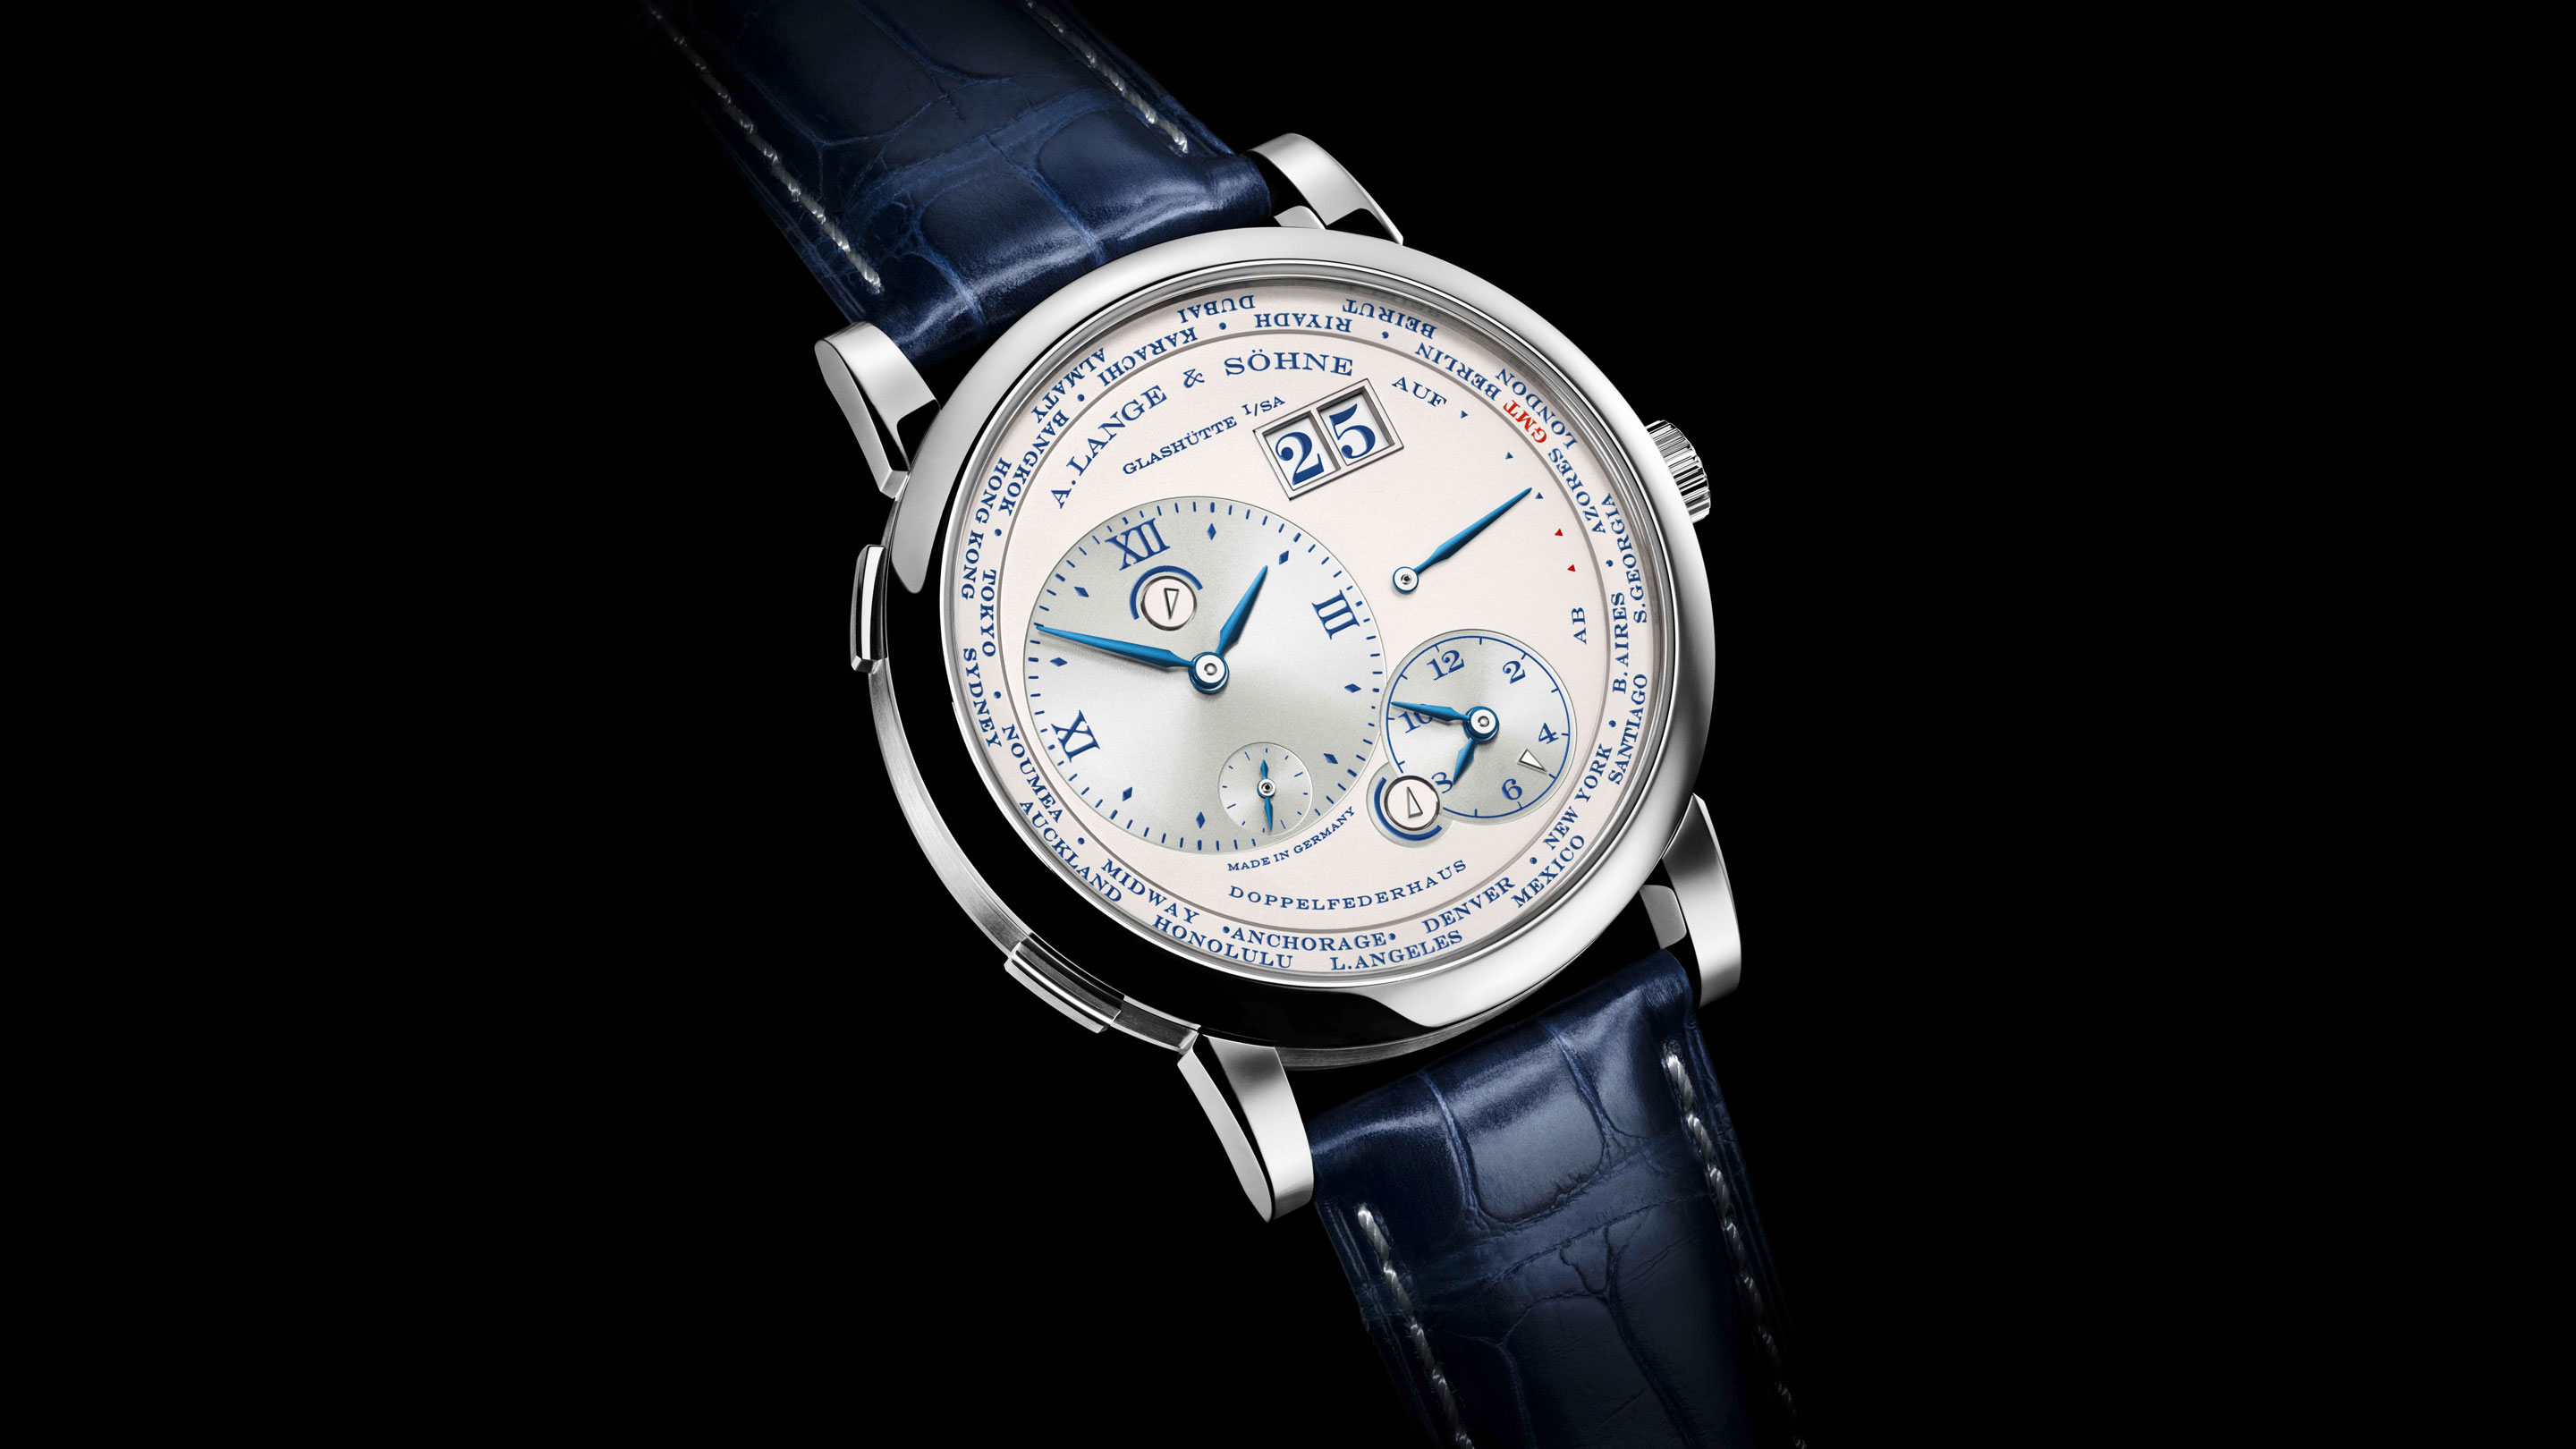 Introducing: The A. Lange & Söhne Lange 1 Time Zone '25th 